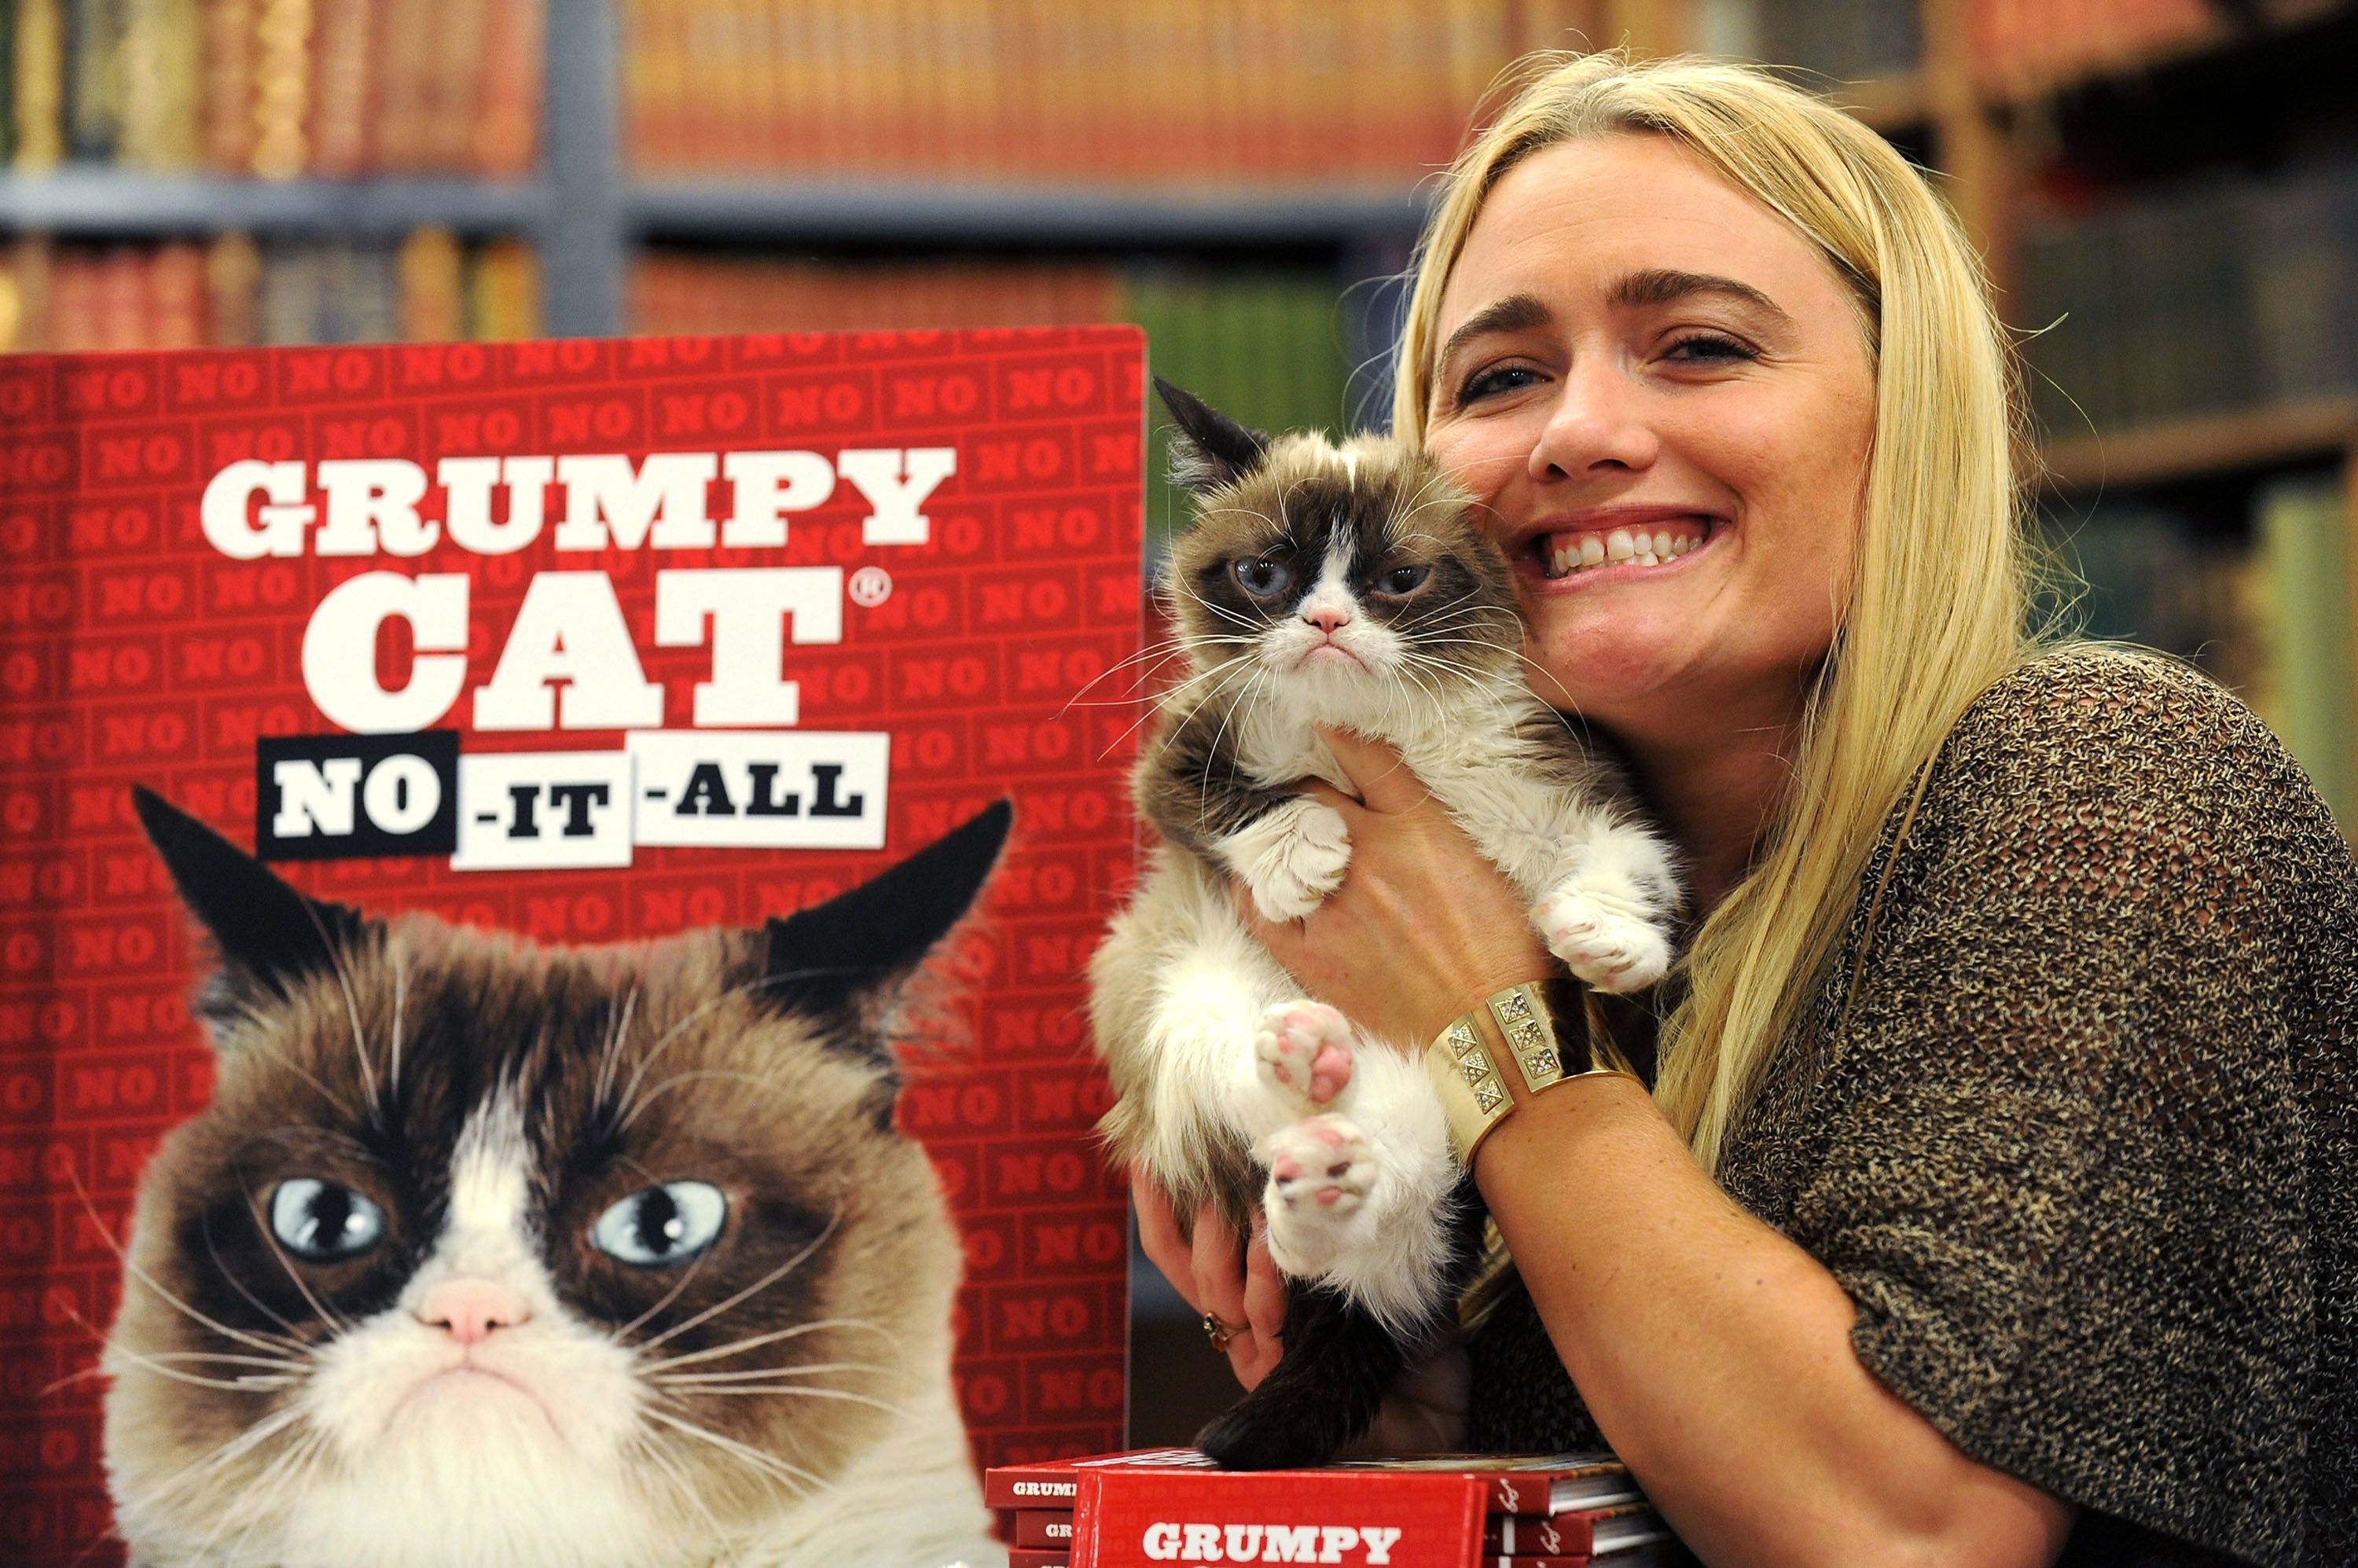 Why top pet influencers like Grumpy Cat have millions of followers